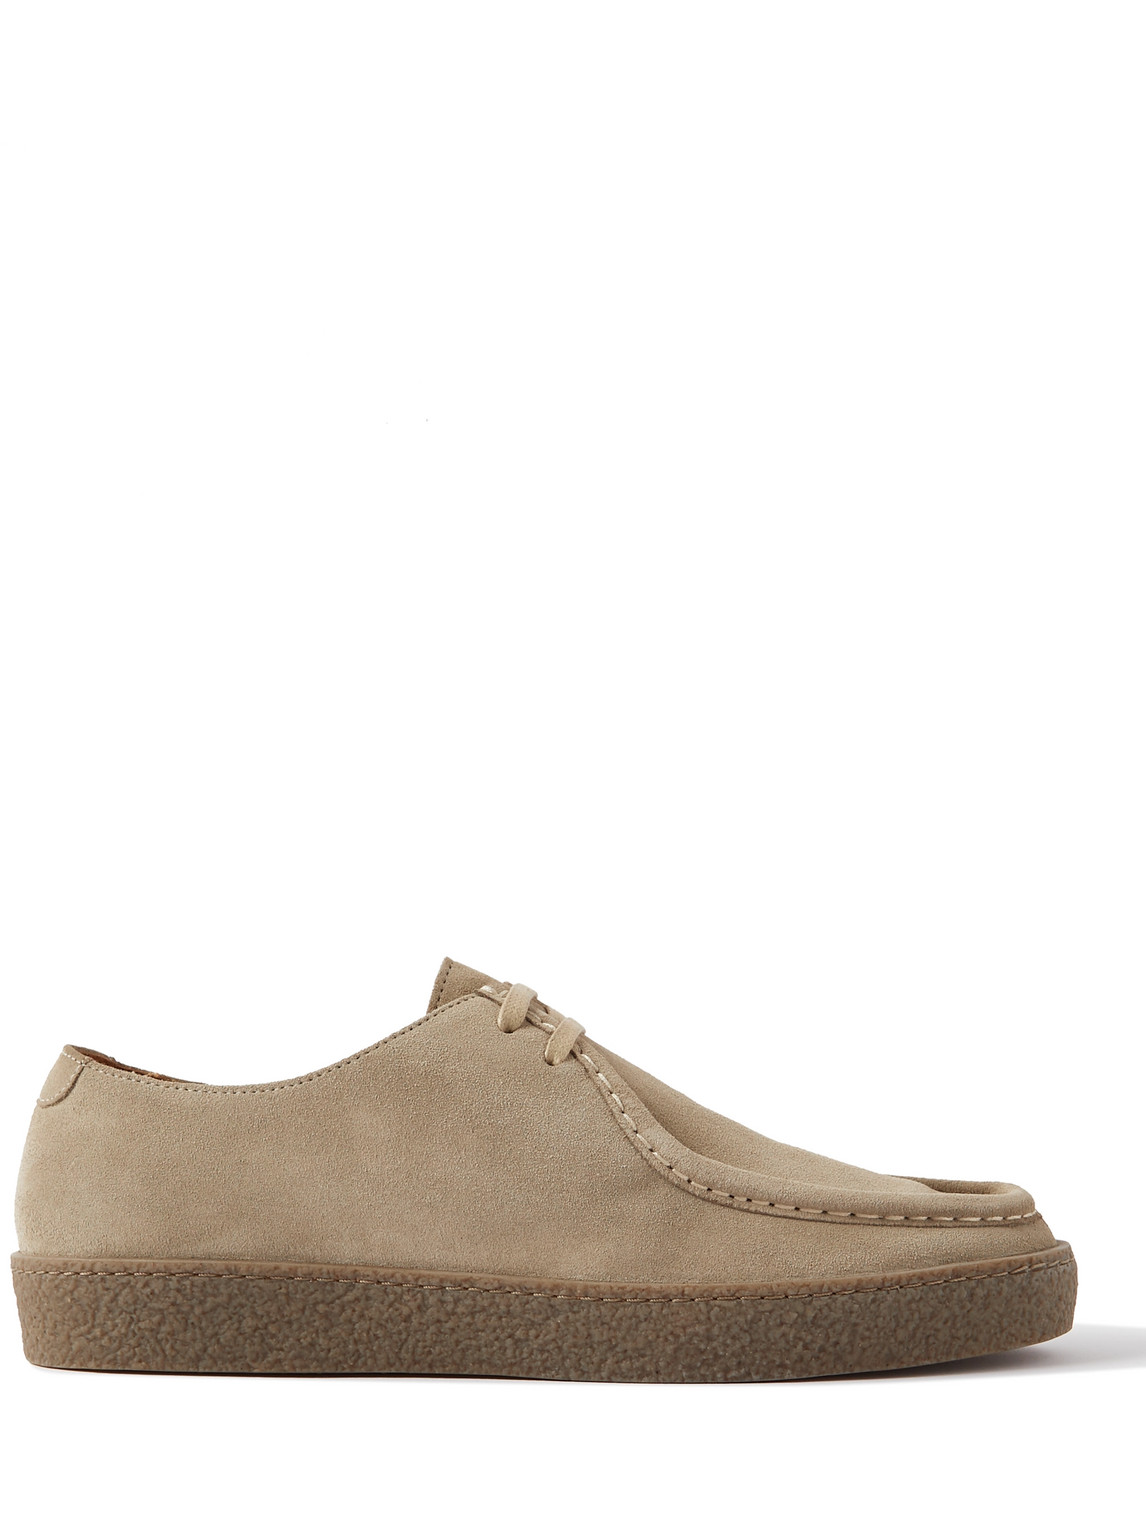 Larry Regenerated Suede by evolo® Derby Shoes